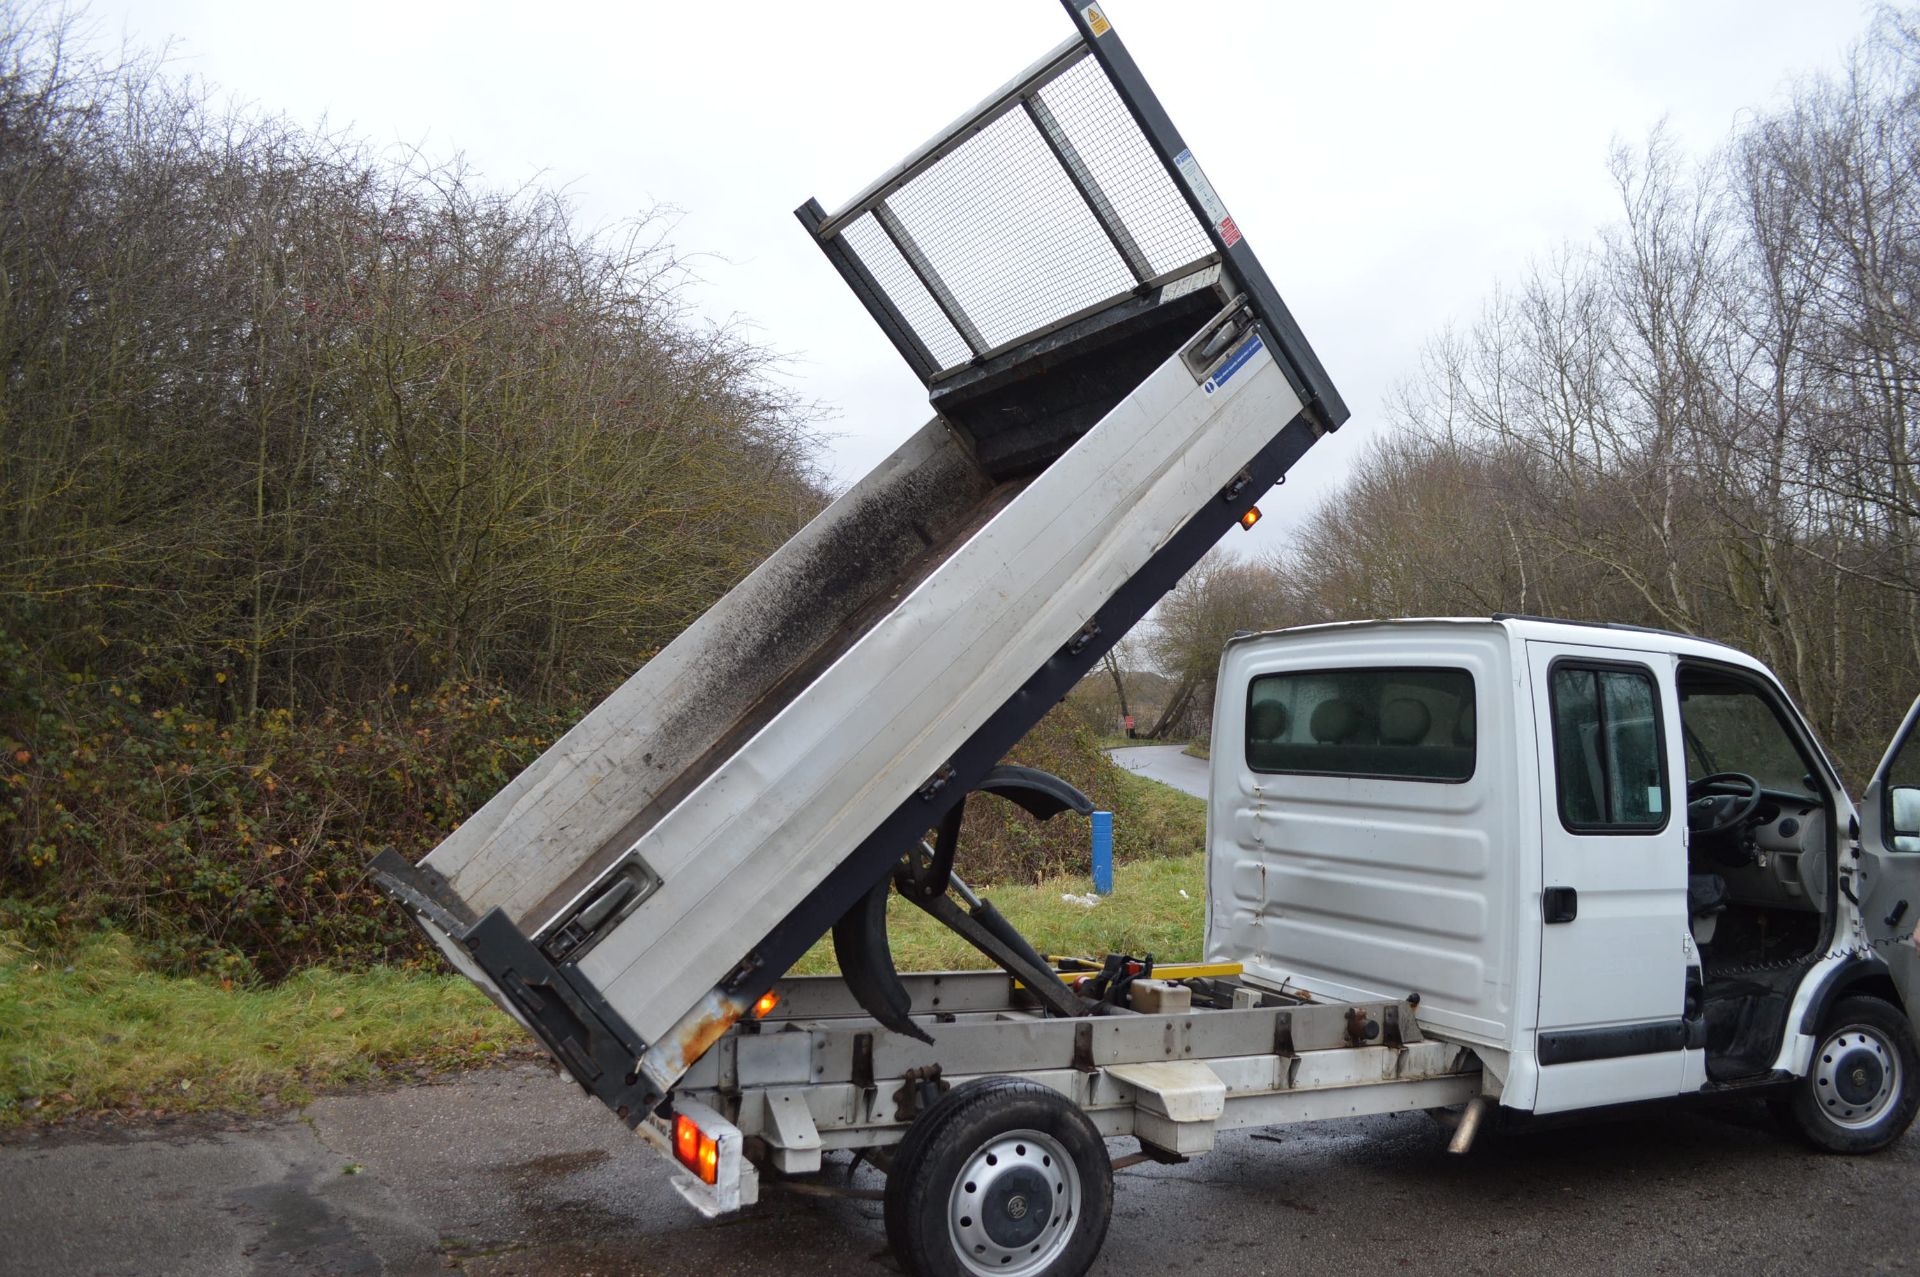 2009/59 REG VAUXHALL MOVANO 3500 CDTI LWB DOUBLE CAB TIPPER, SHOWING 2 FORMER KEEPERS *NO VAT* - Image 17 of 18